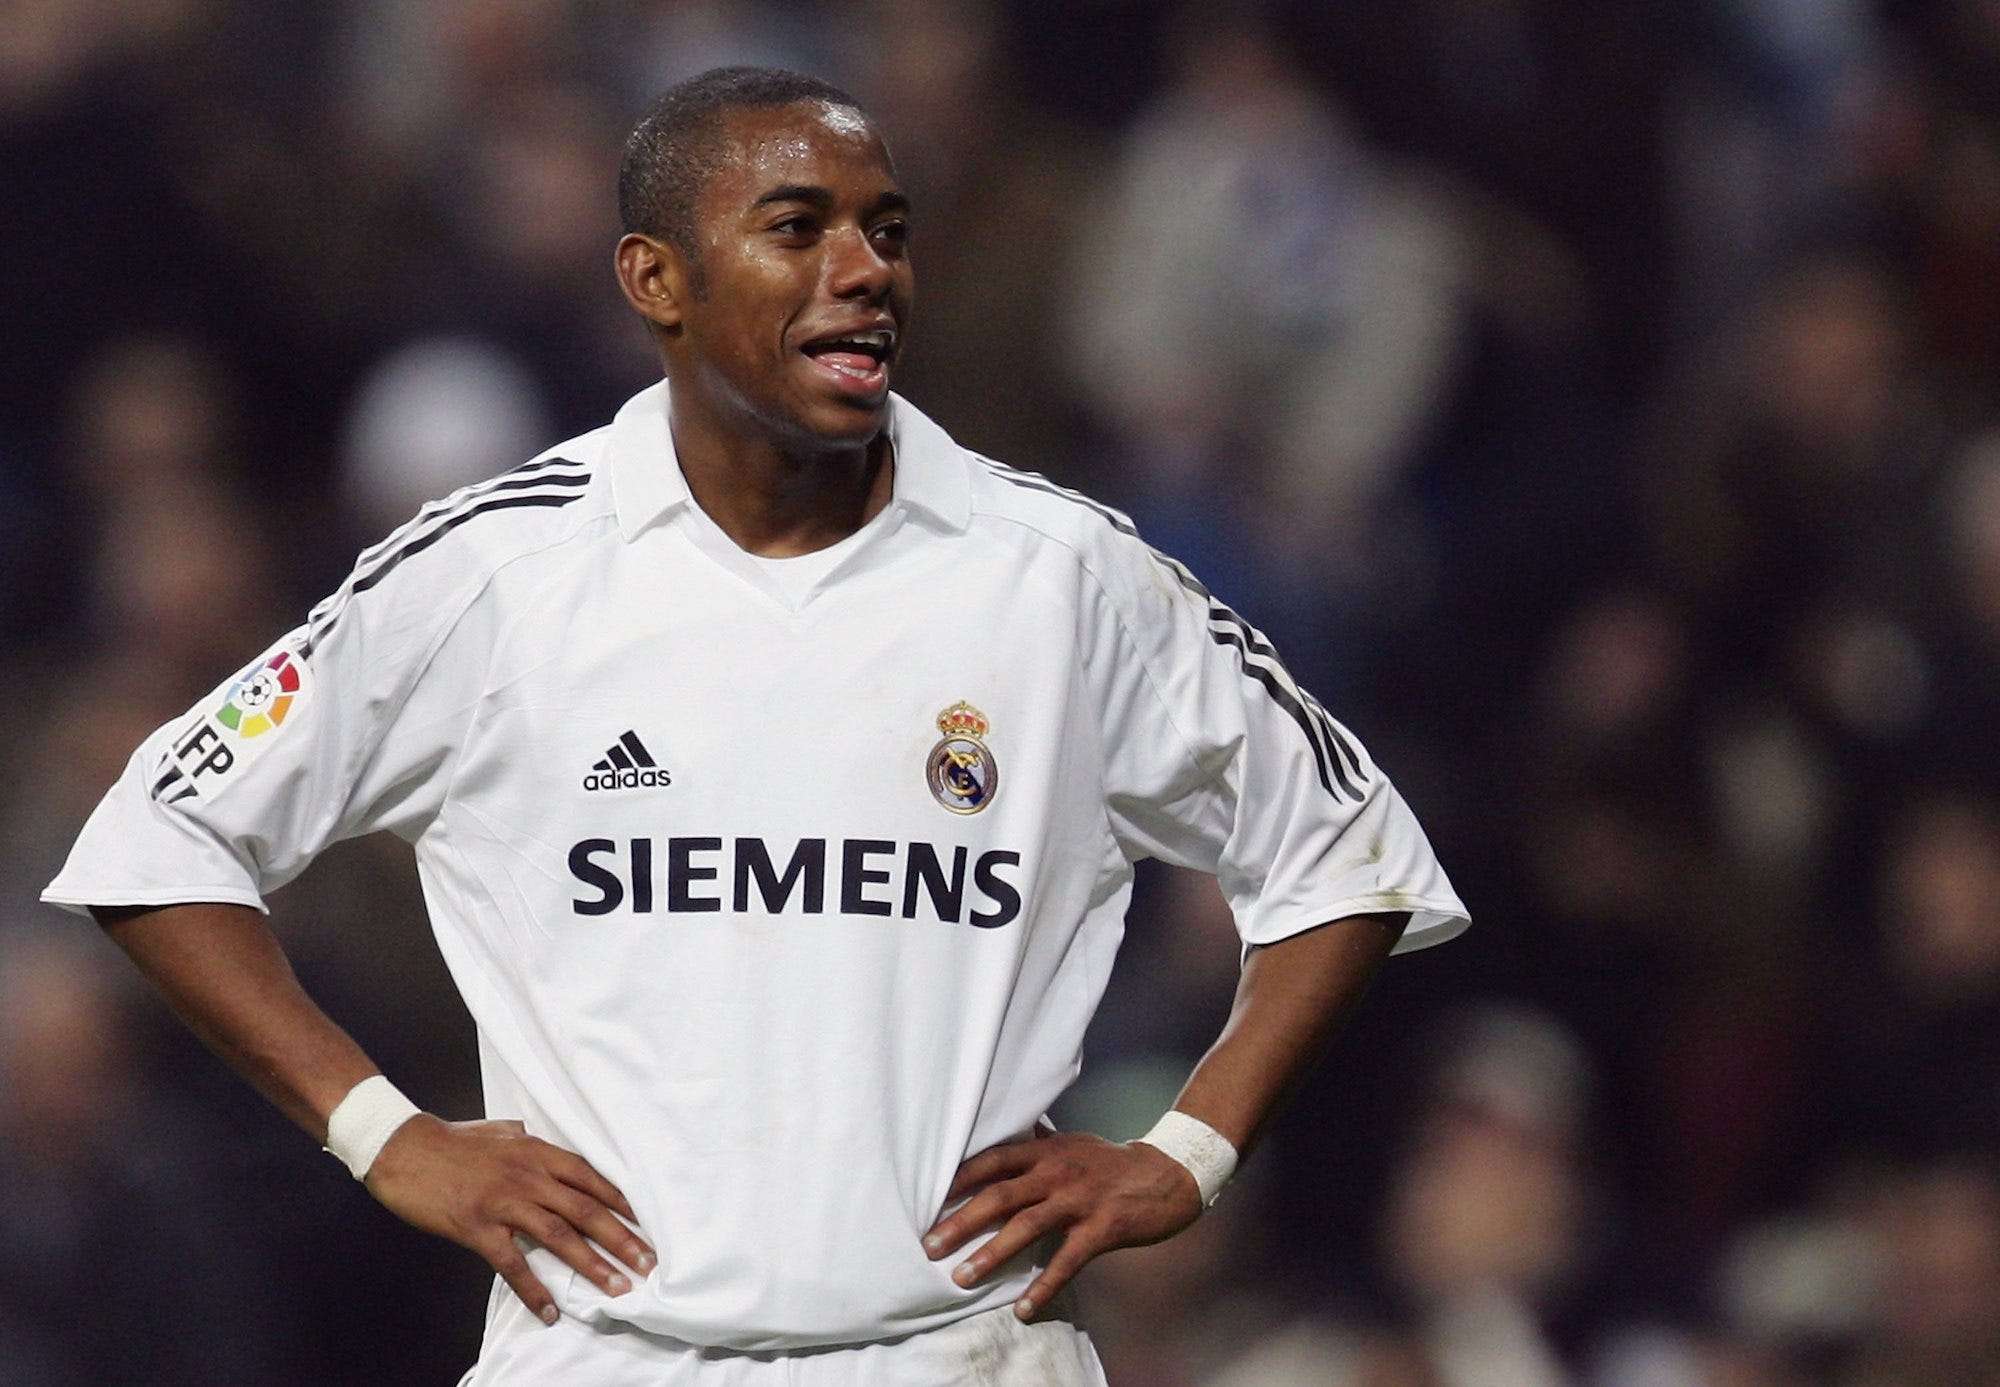 A former Real Madrid star once considered among the best soccer players